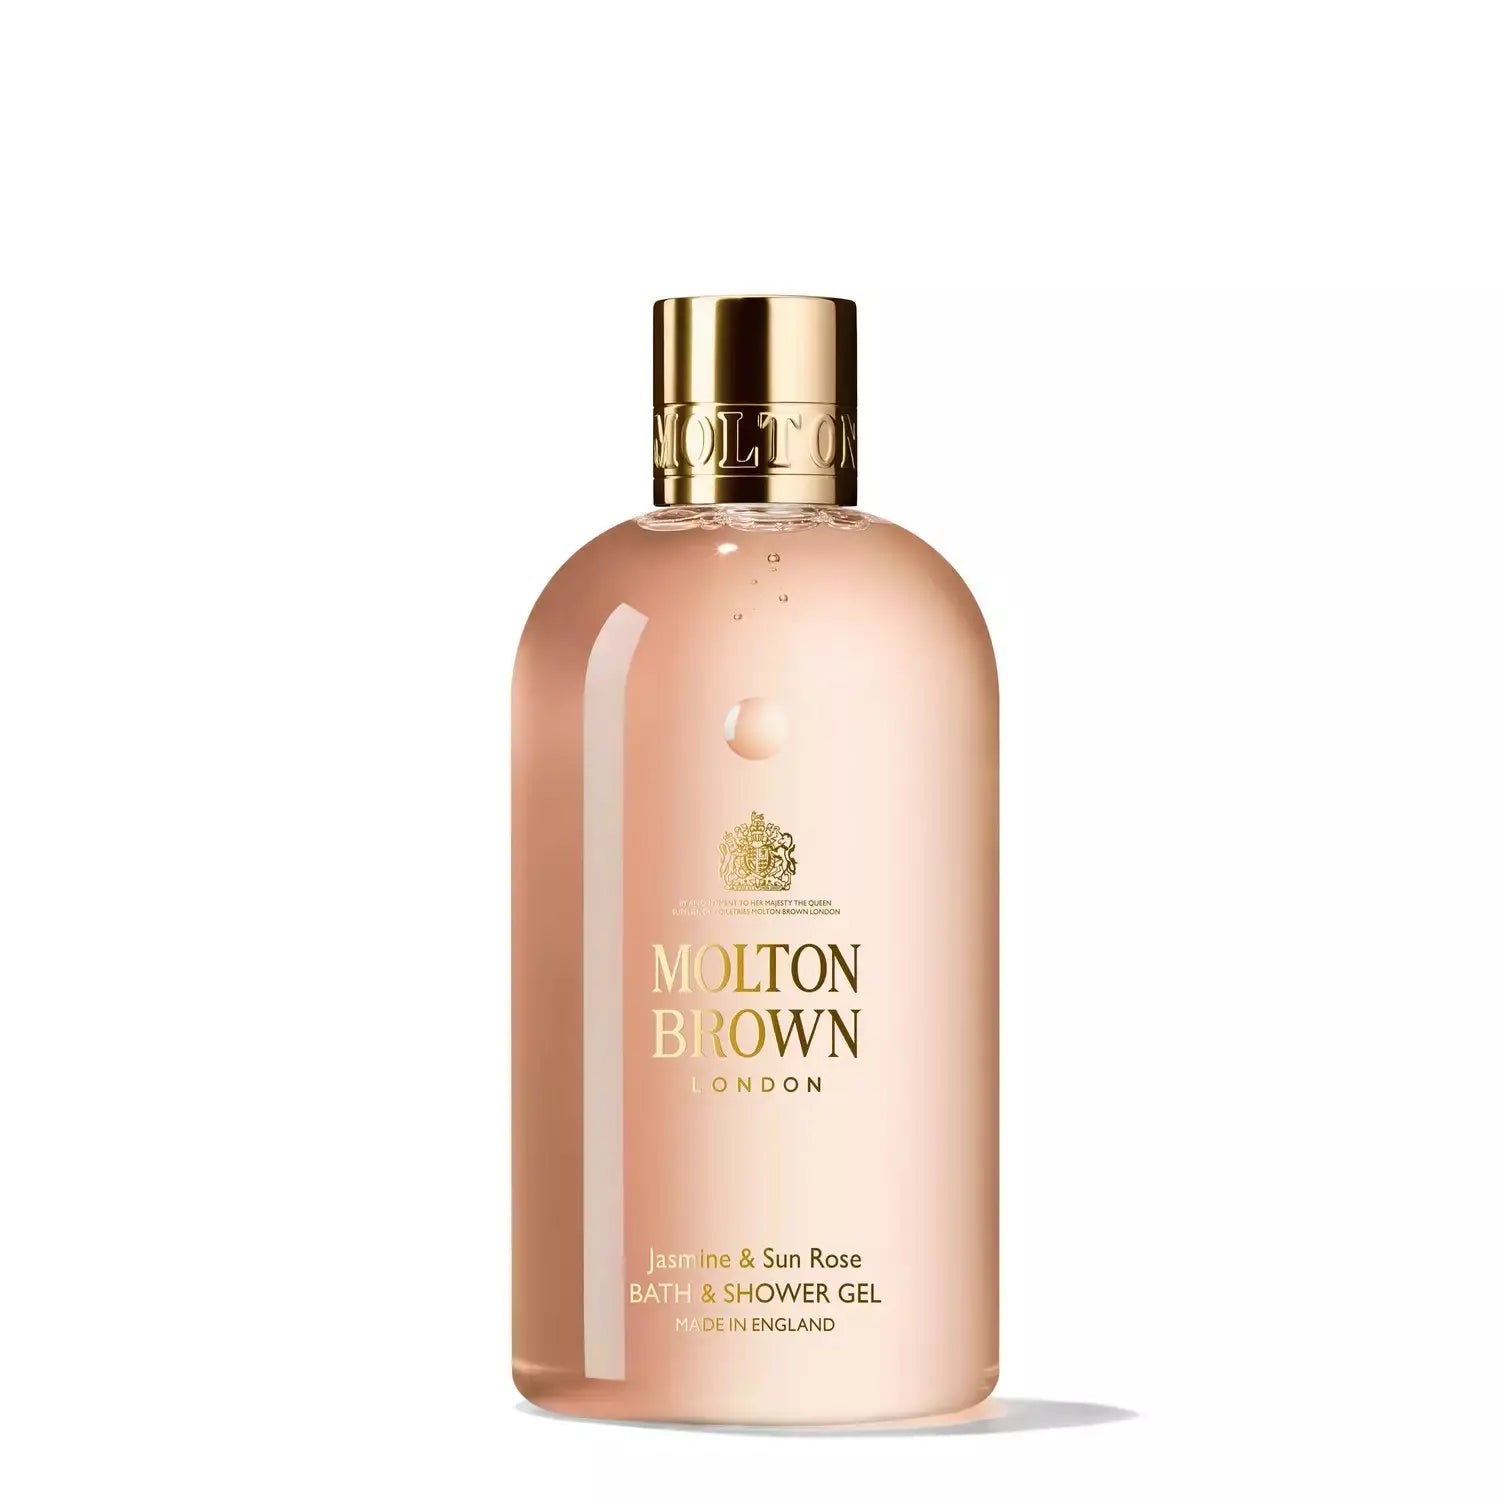 Molton Brown Jasmine and Sun Rose Bath and Shower Gel